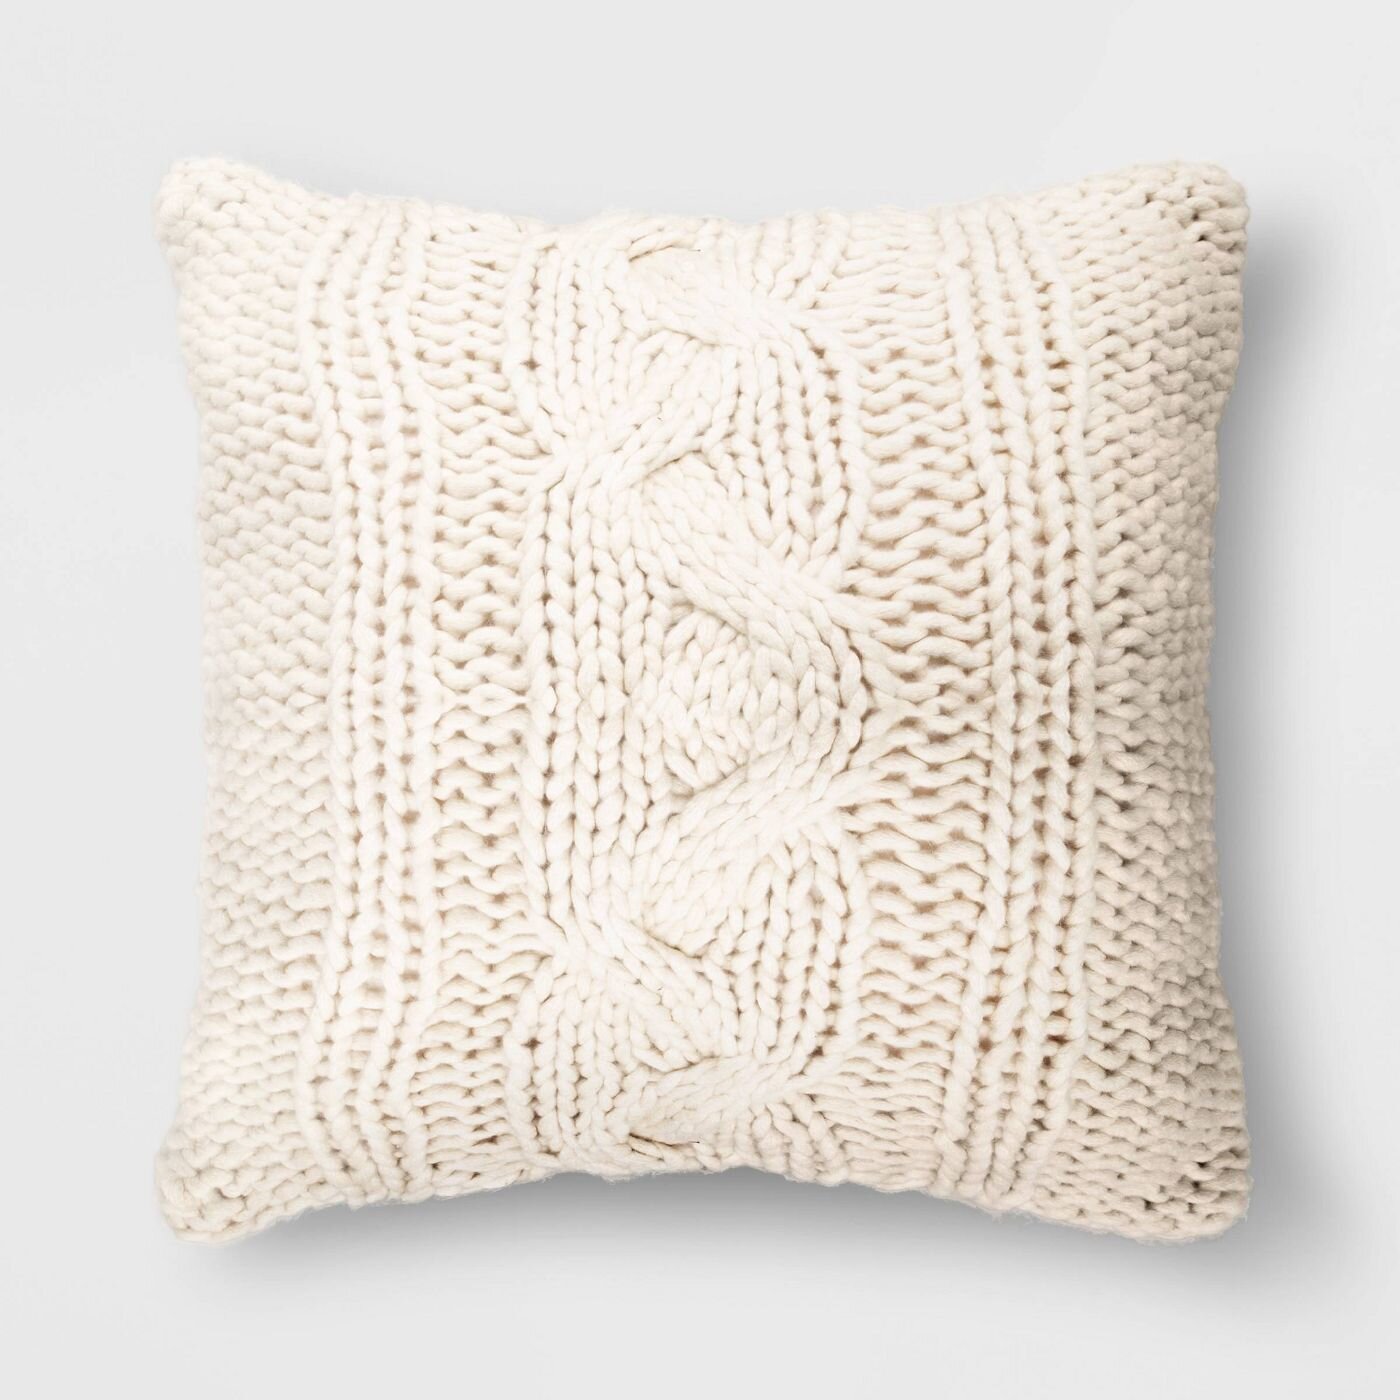 Oversized Square Chunky Cable Knit Throw Pillow.jpg